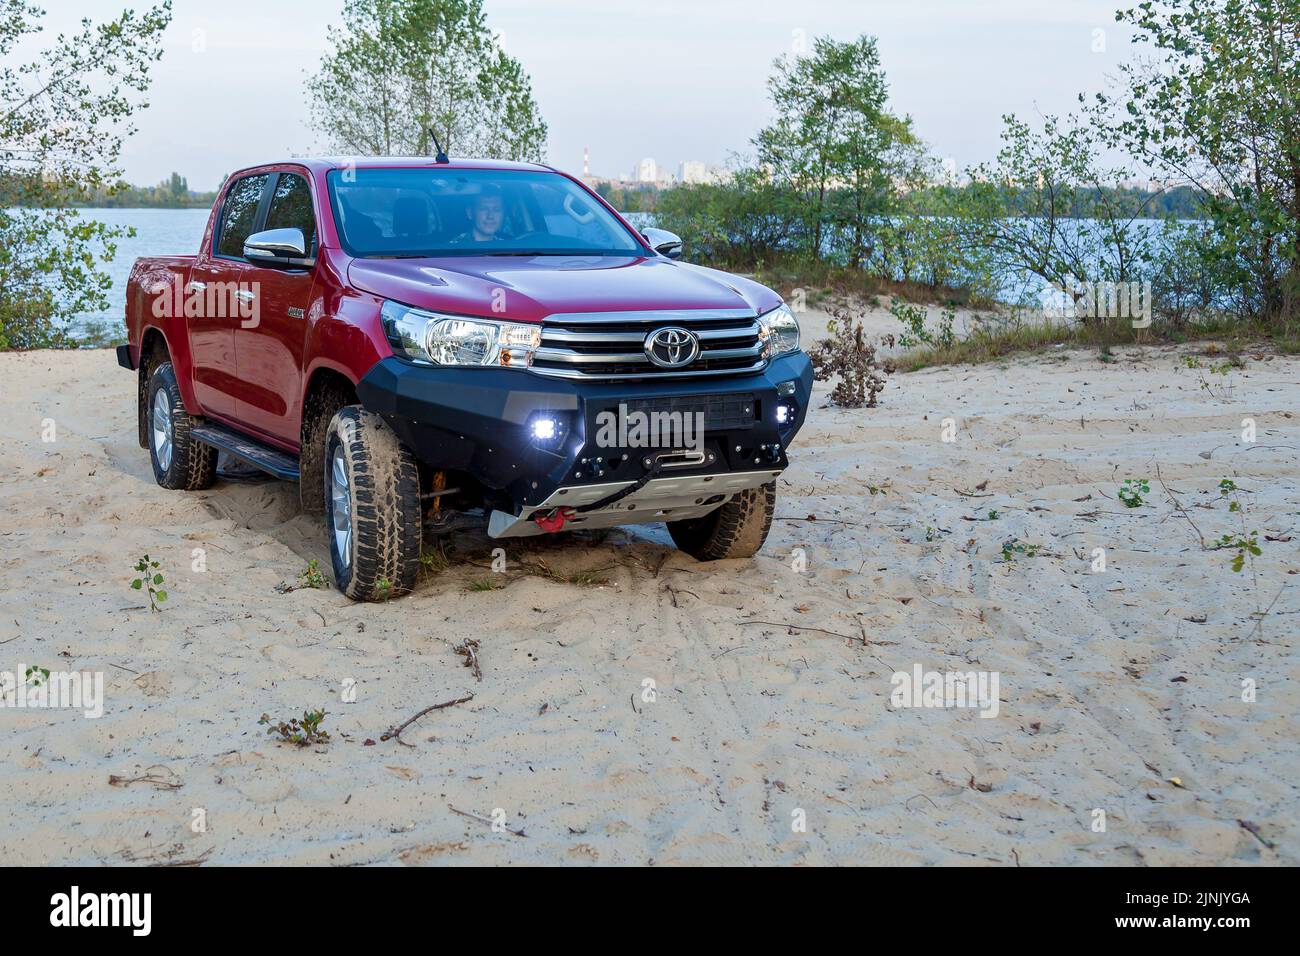 Ukraine Kiev October 10, 2020: Red new 4x4 pickup with Toyota Hilux double cab, with reinforced metal bumper and winch. Japanese car brand. Stock Photo